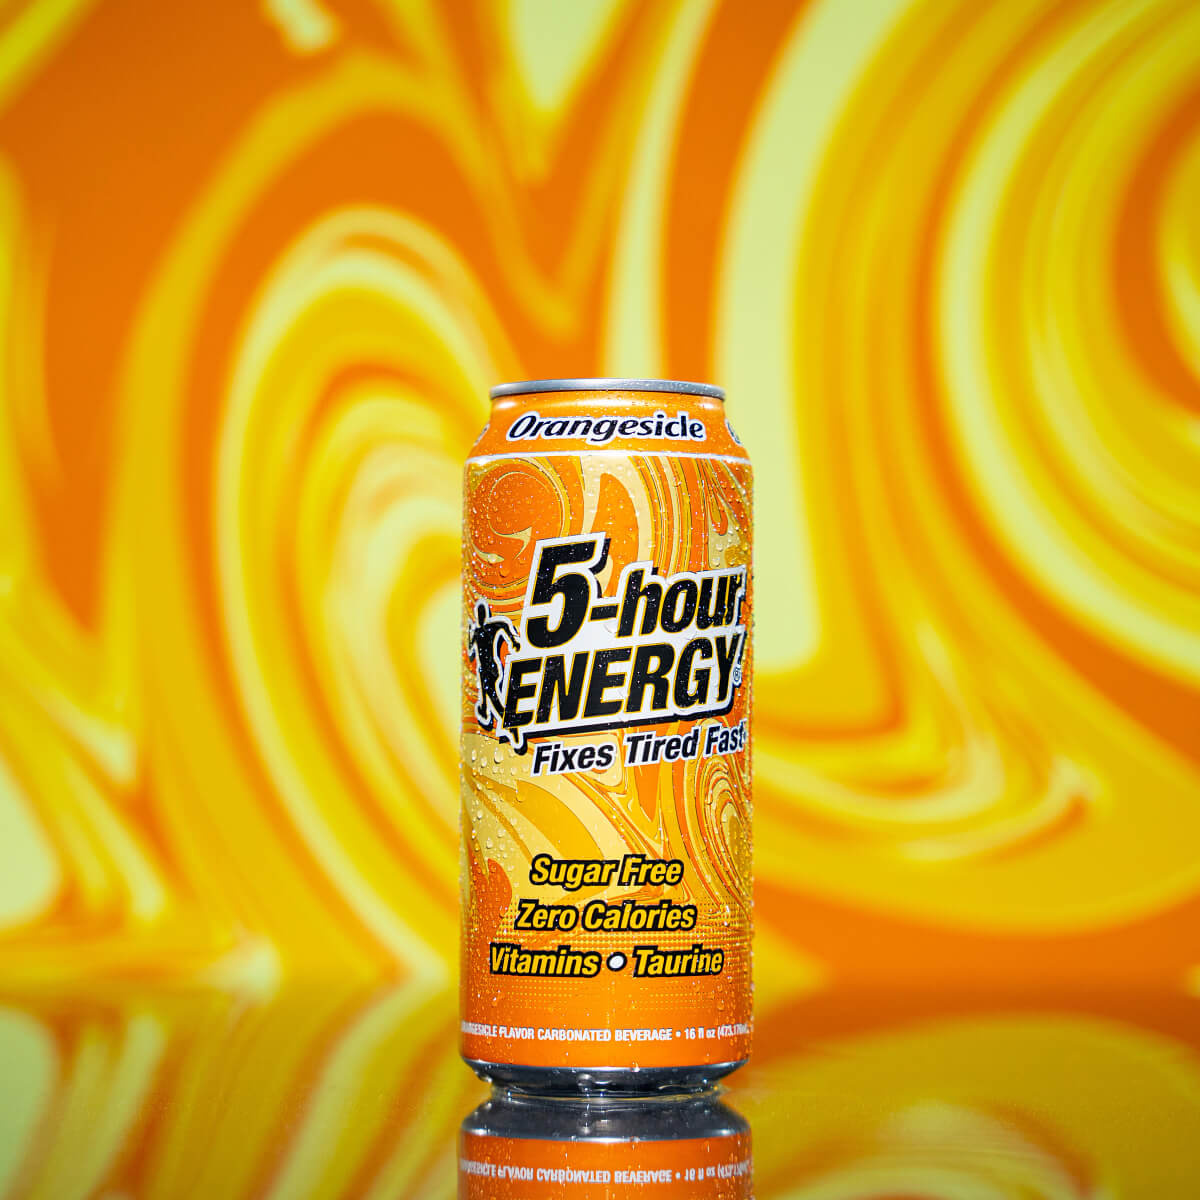 Individual can of 5-hour ENERGY Orangesicle